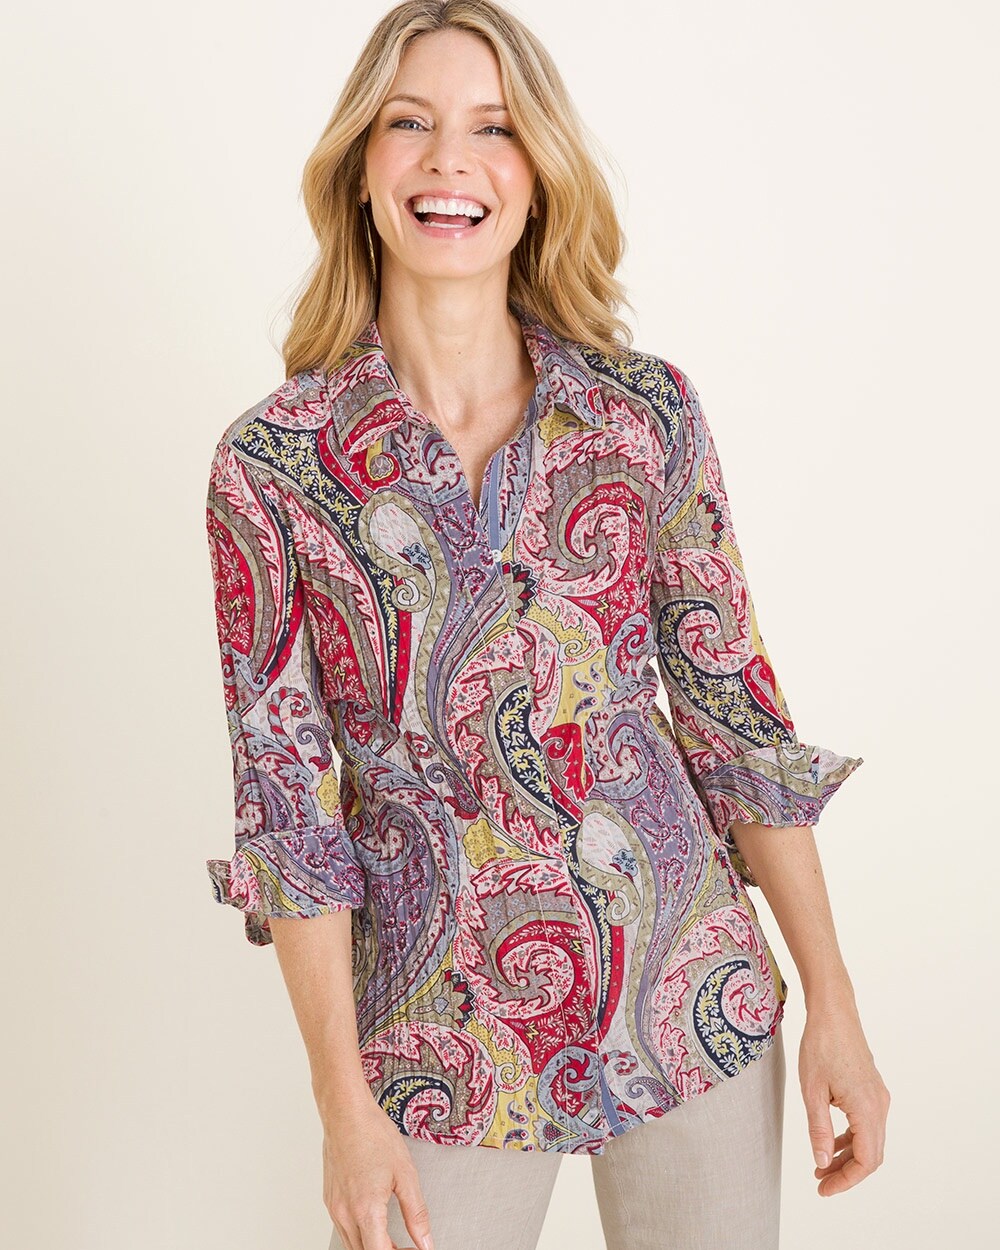 CINO for Chico's Printed Crinkle Shirt